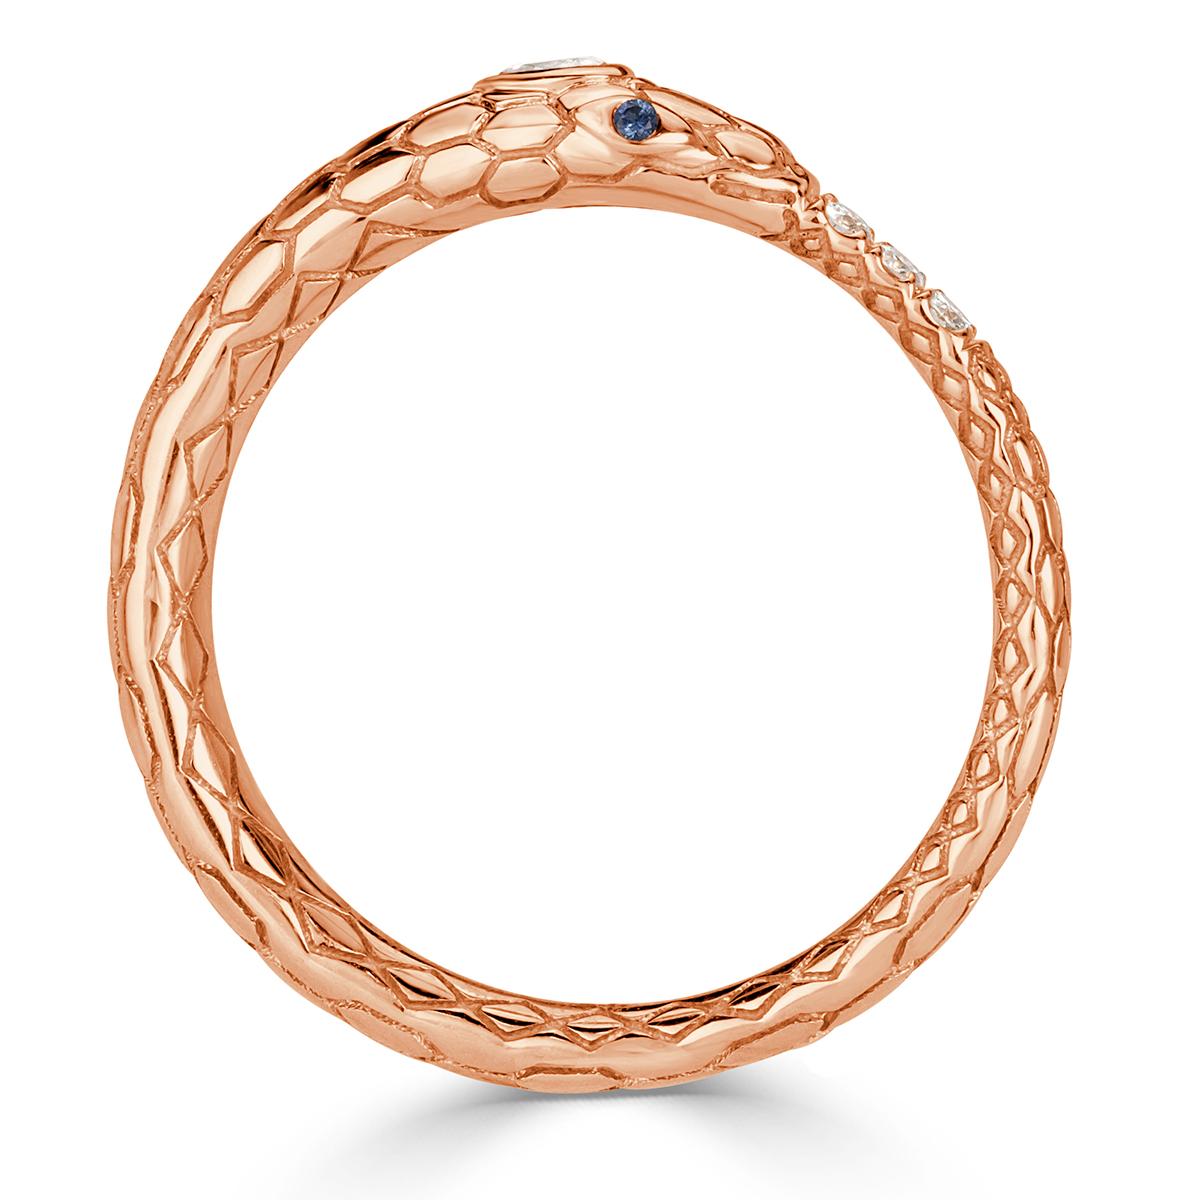 Created in 14k rose gold, this ravishing diamond and tourmaline ring showcases a stunning ouroboros design embelished with 0.05ct of pear shaped and round brilliant cut diamonds as well as 0.02ct of round cut sapphires. You can choose different gems